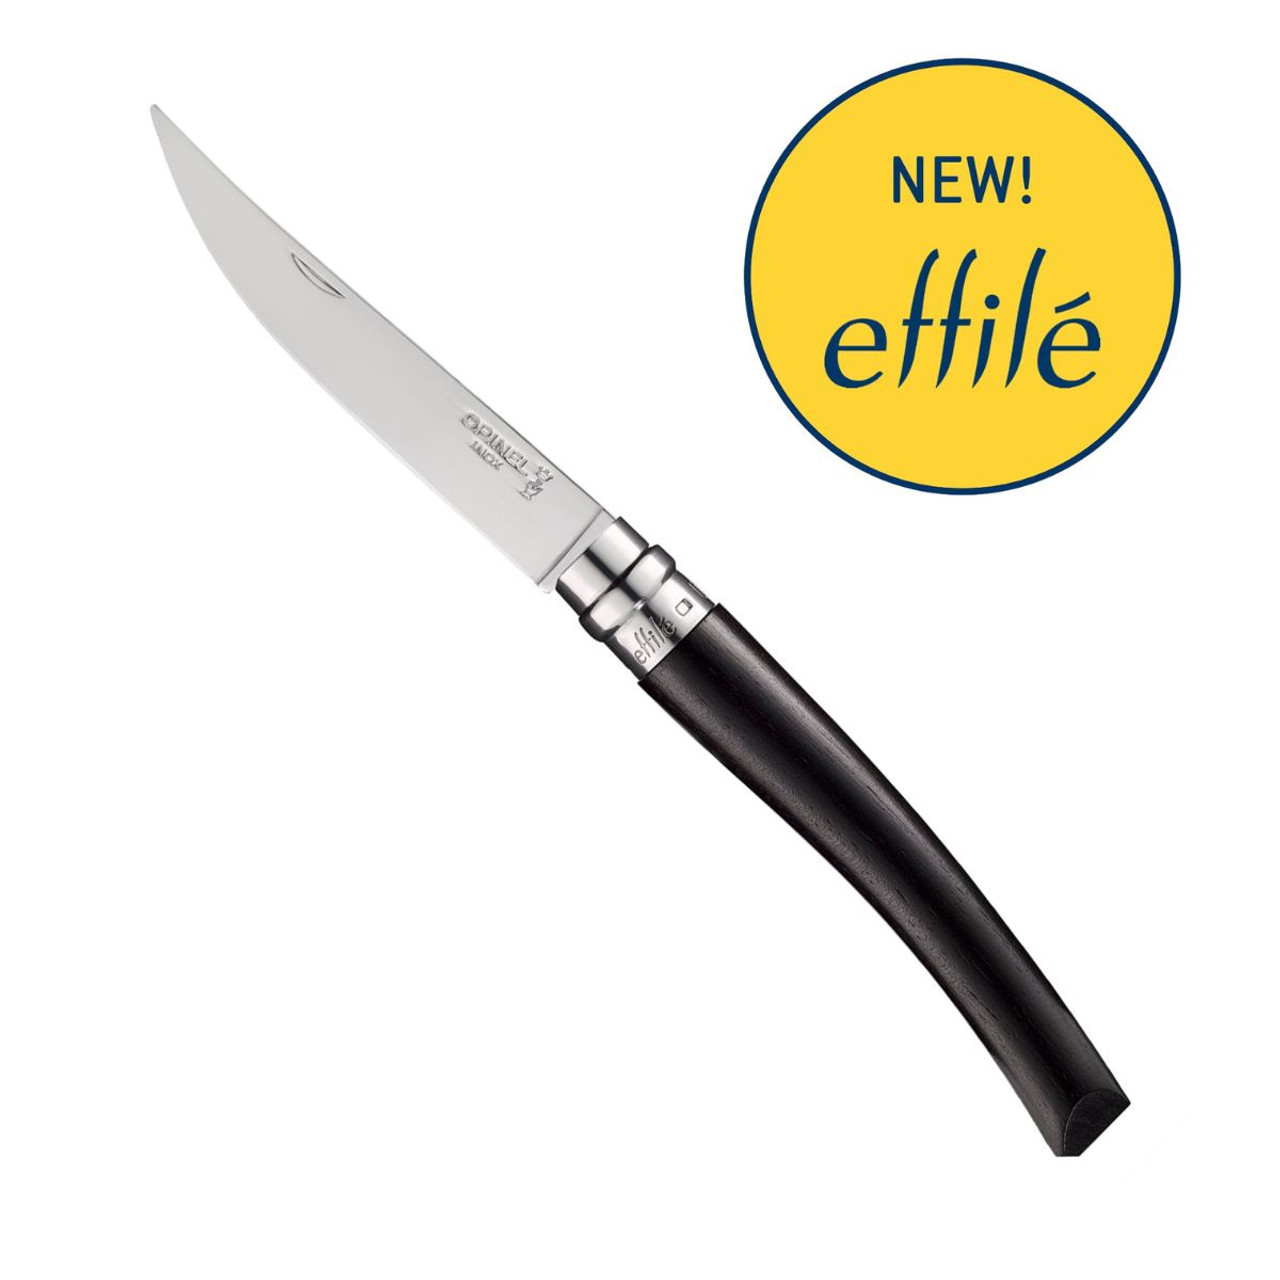 Opinel No.10 Effile (OP002566) 4" Stainless Steel Polished Straight Back Plain Blade, Ebony Wood Handle